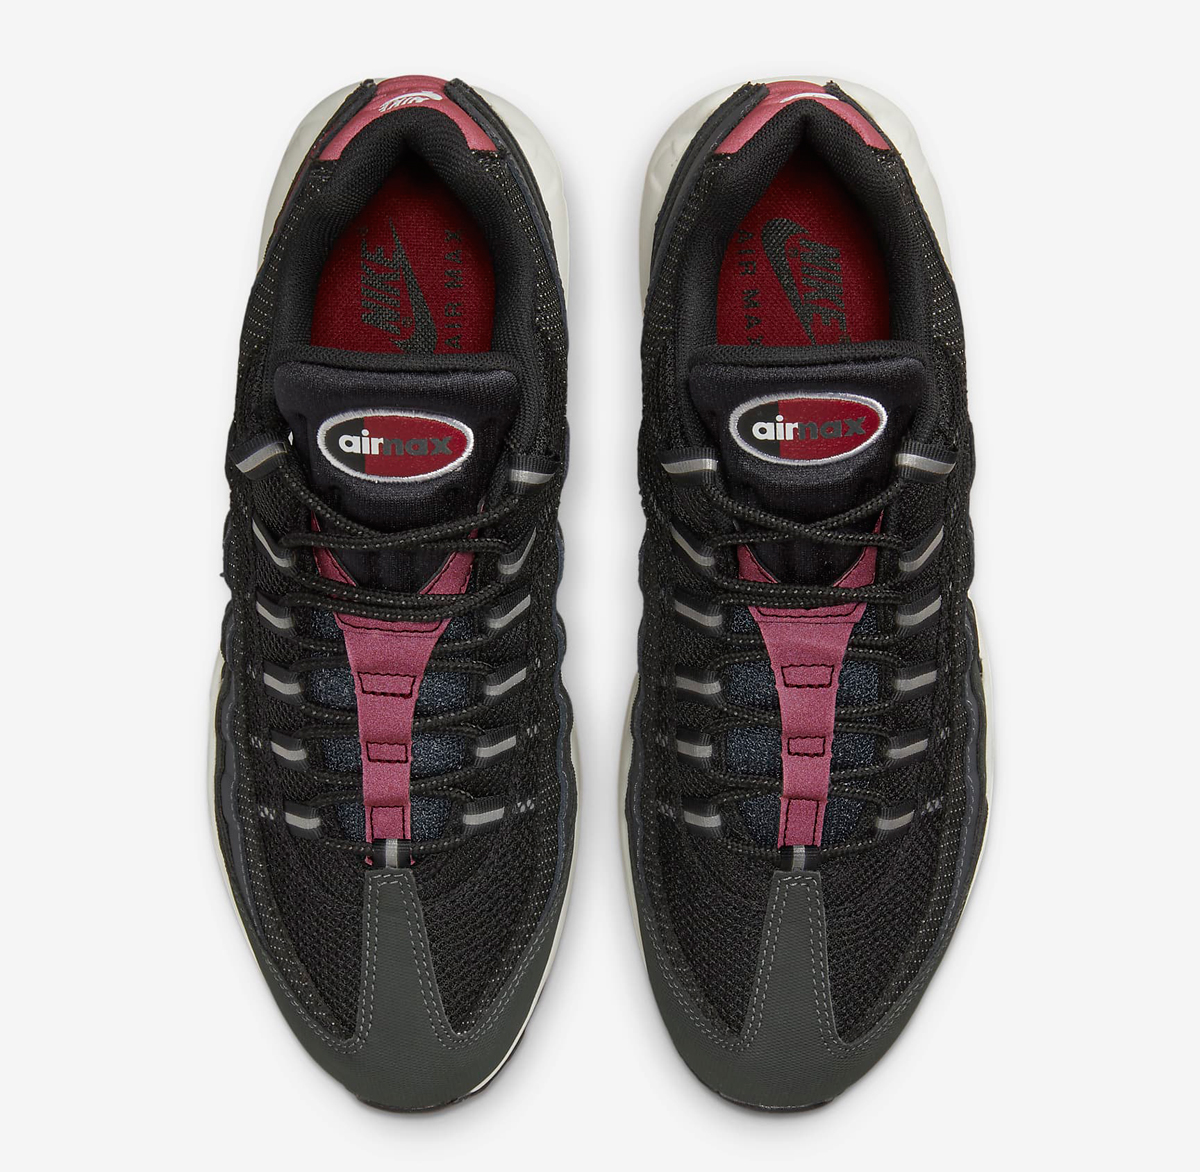 nike-air-max-95-anthracite-team-red-black-release-date-4